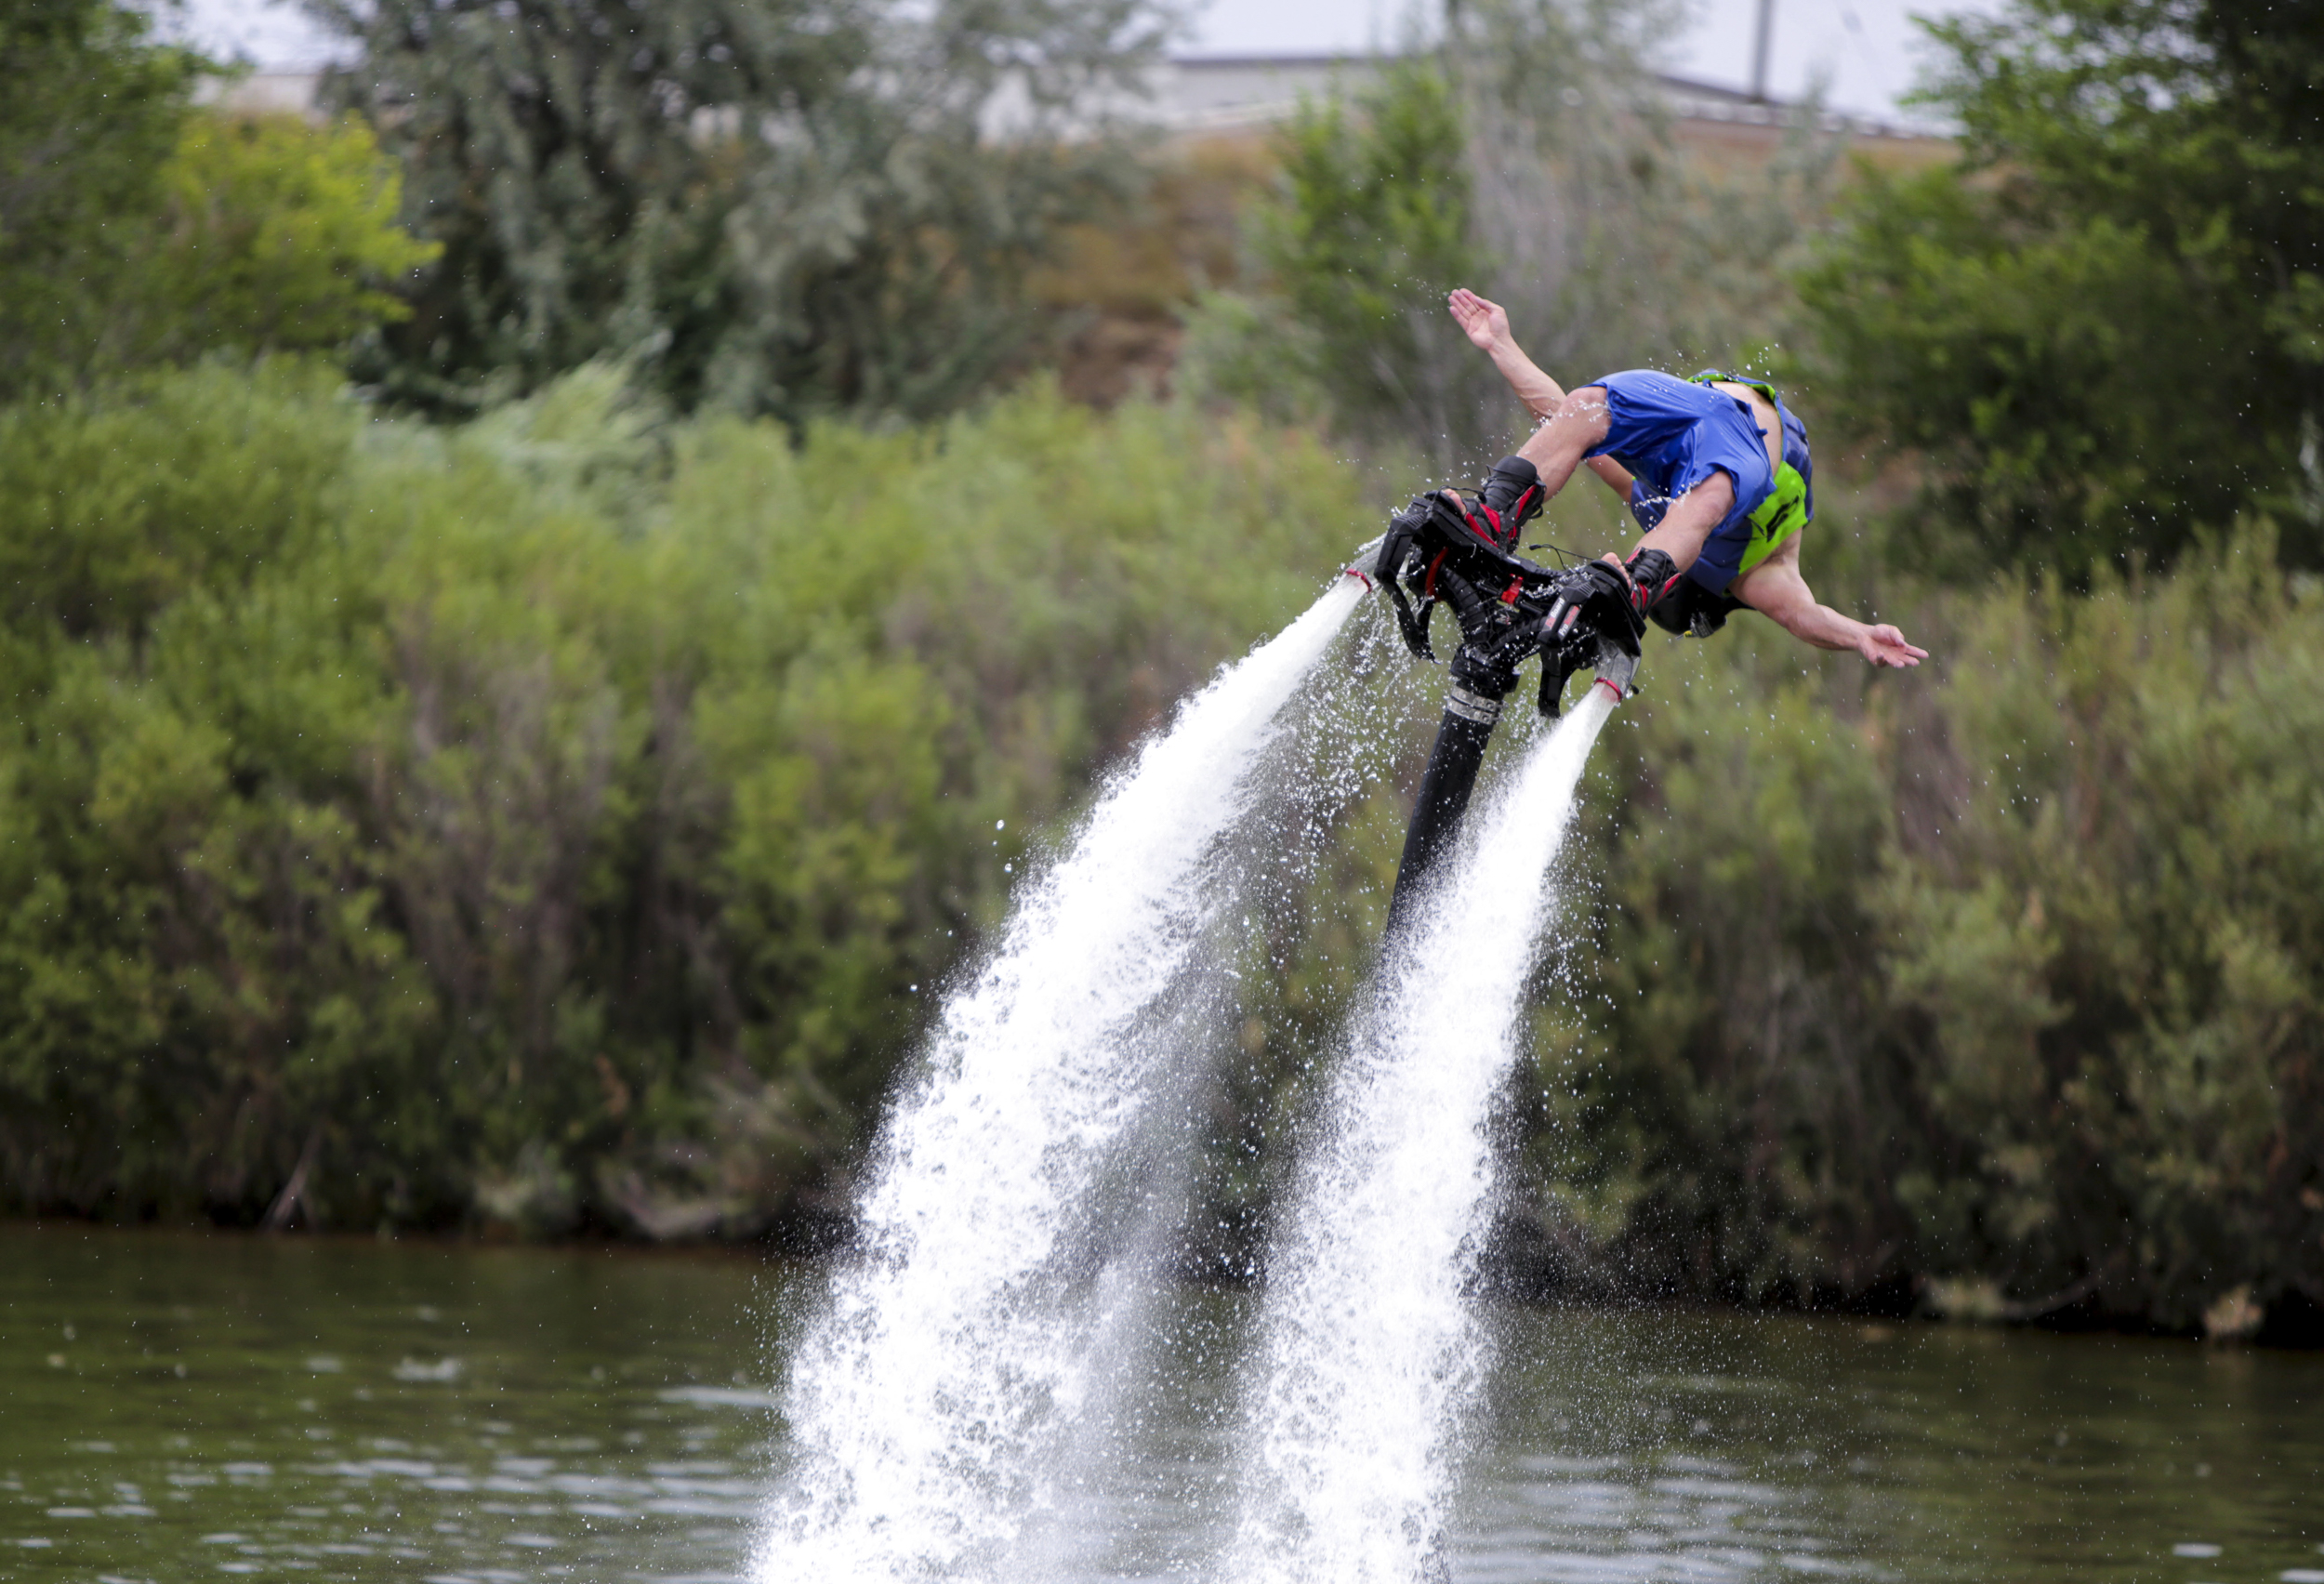  Chris Hock does a backflip on a fly board during the Bridge the Gap wakeboard and waterski tournament on Saturday at Madison Lake in Greeley, Colorado. The purpose of the event was to honor Scott Barone a wakeboarder who passed away. Additionally th